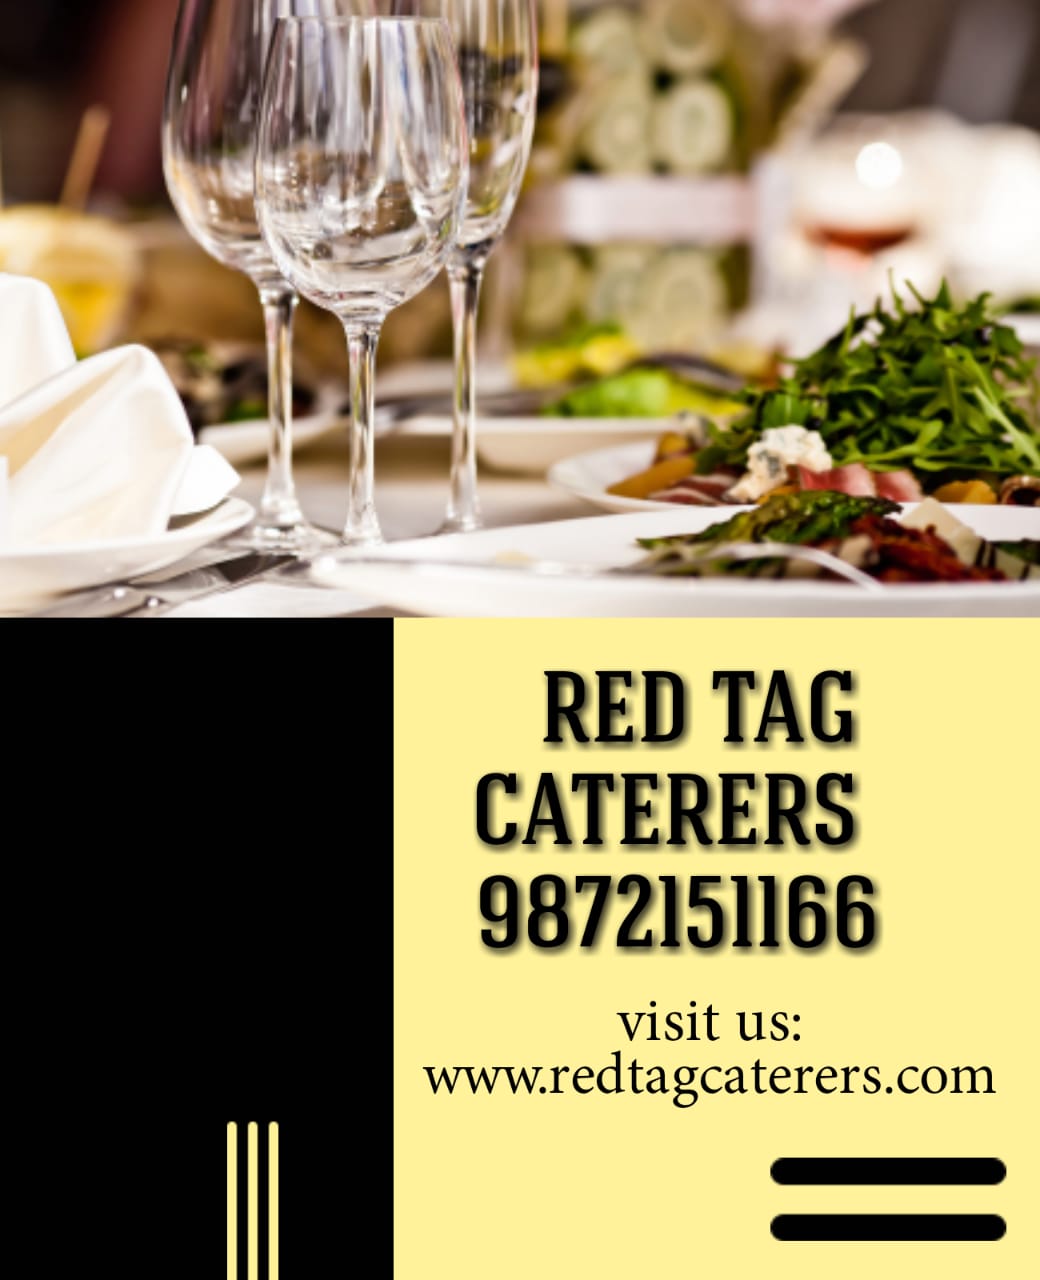 Best extensive years of experience RED TAG caterers in Chandigarh city | Red Tag Caterers | Best experience caterer in Chandigarh, good food caterer in Chandigarh, best services caterer in Chandigarh, luxury wedding caterer in Chandigarh, small & high budget caterer in Chandigarh - GL46303